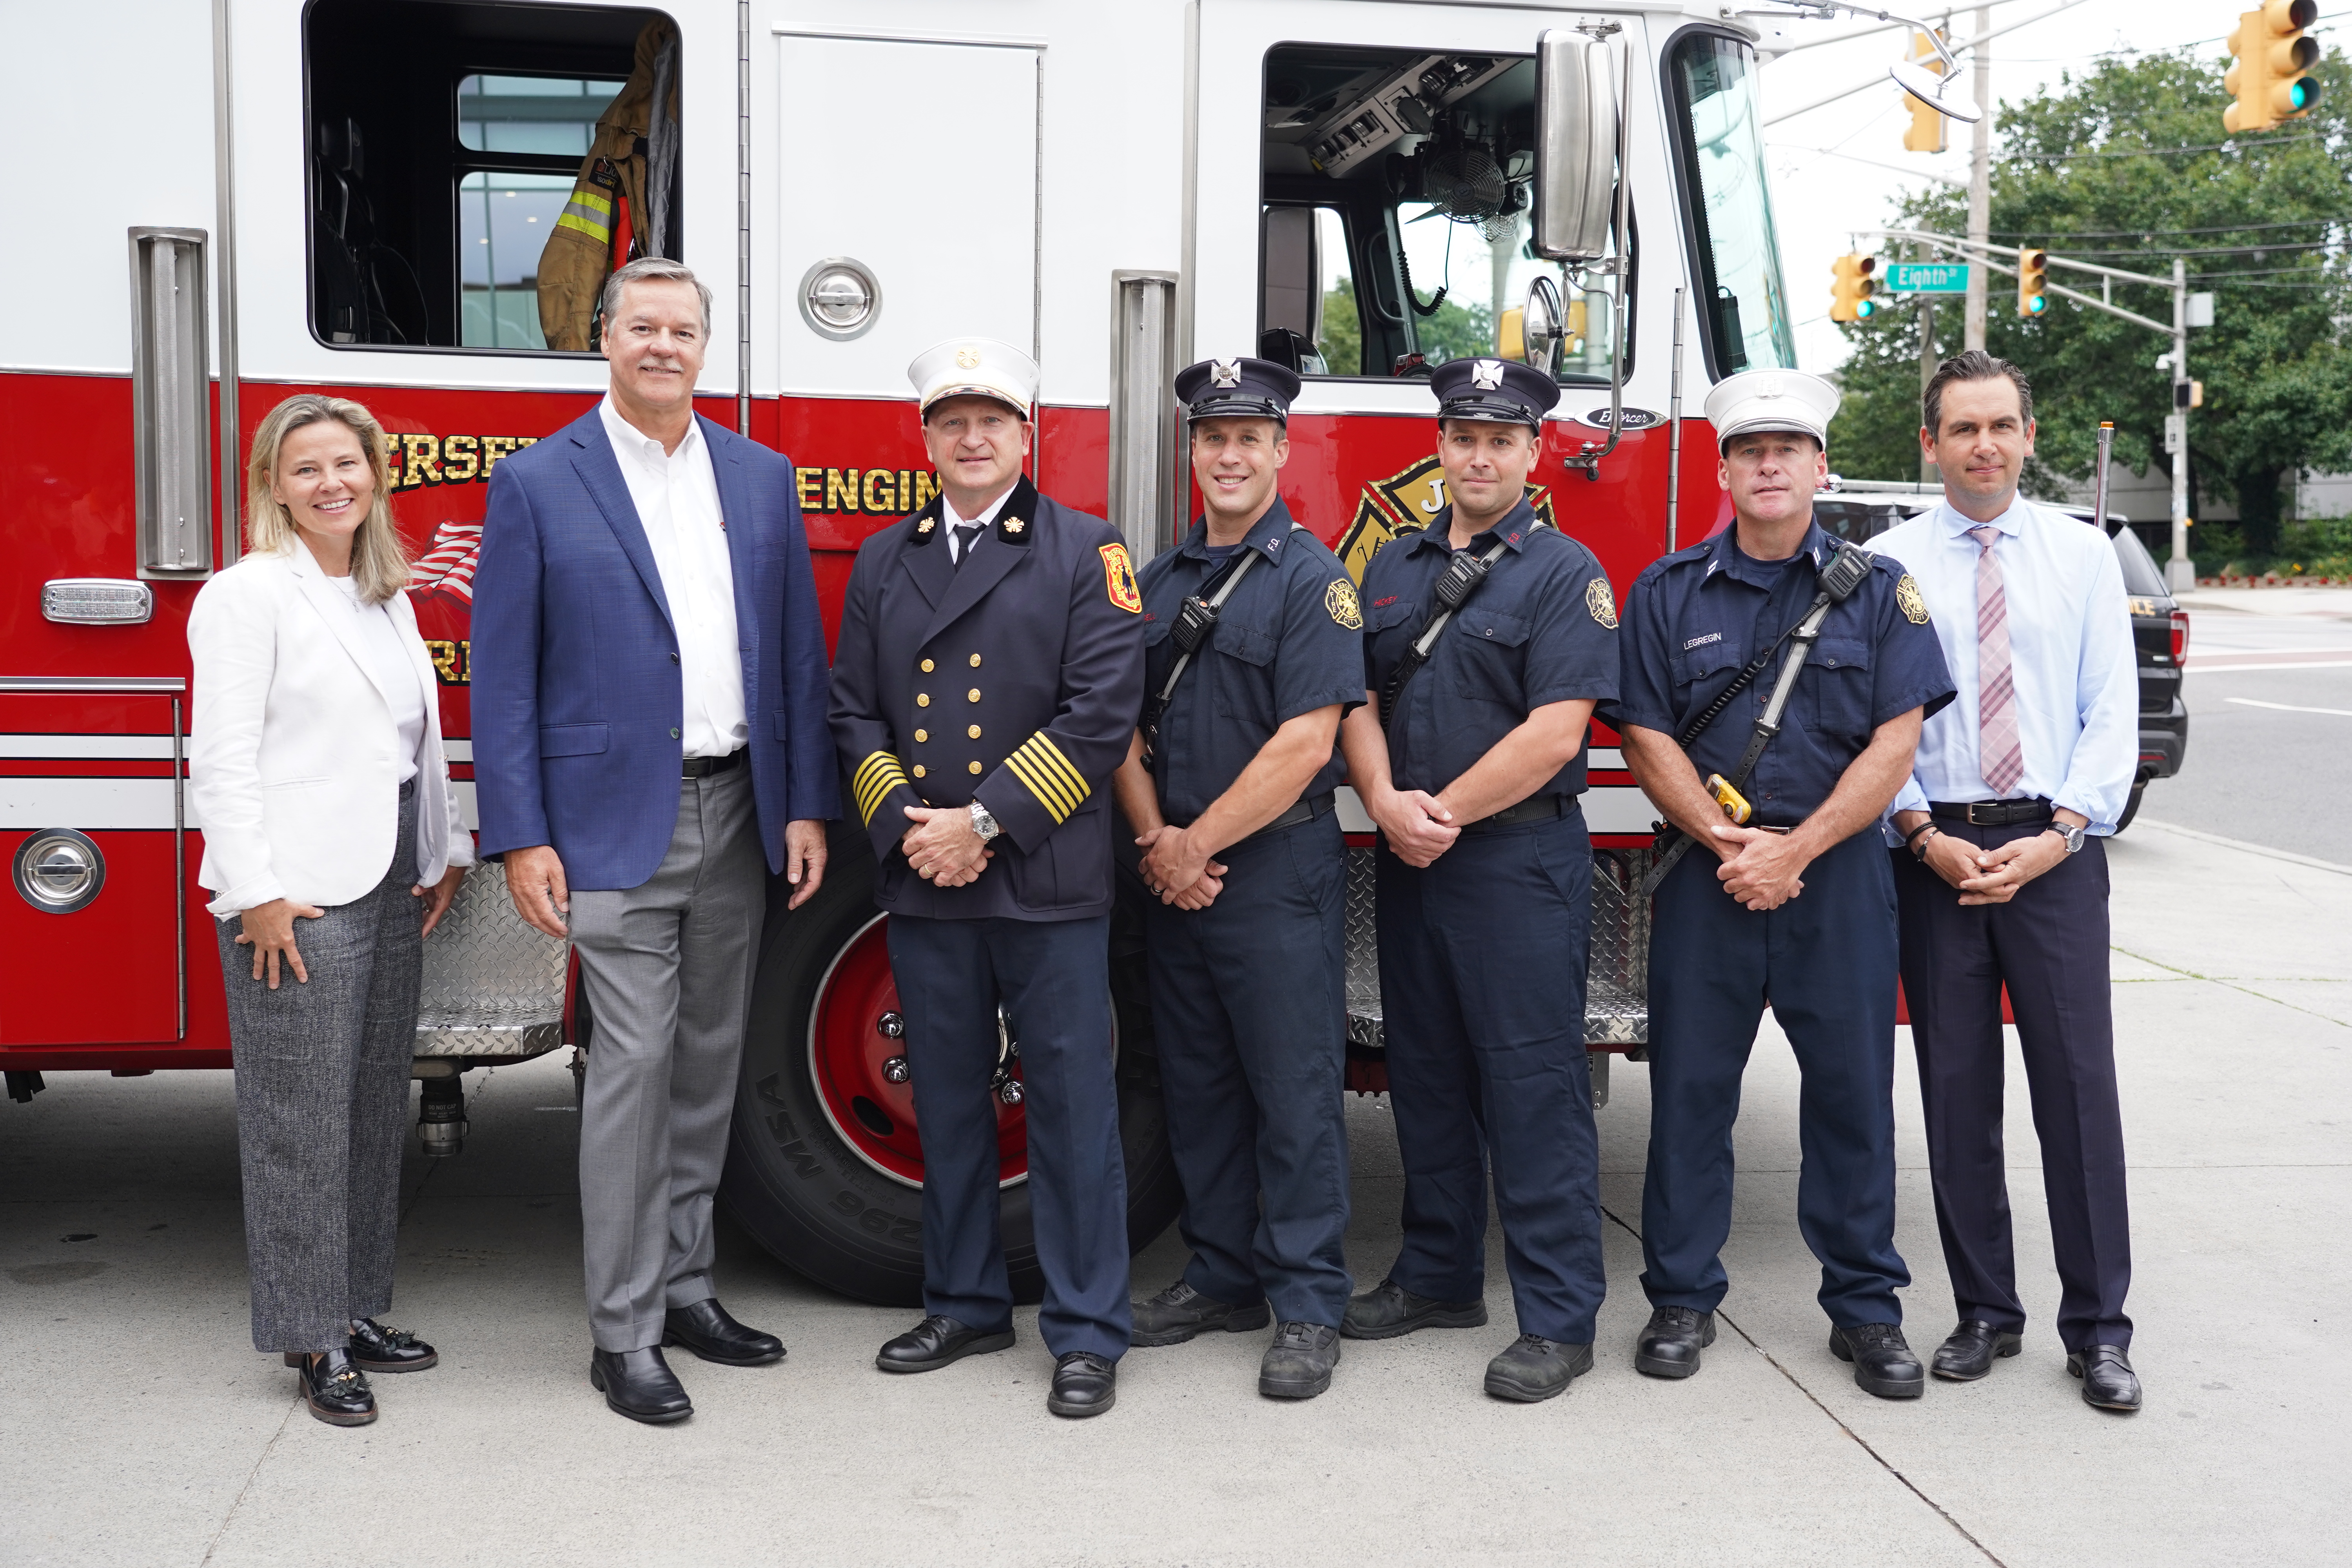 SERVPRO announces partnership with Northern Trust to honor first responders at the PGA TOUR event. Launches of Firefighter Appreciation Program and new partnership with First Responders Children's Foundation.

From left, Executive Director of THE NORTHERN TRUST Julie Tyson, SERVPRO CEO Rick Isaacson, Jersey City Battalion Chief Stephen McGill, Firefighter Craig Vagell, Firefighter Scott Hickey, and Captain Robert Legregin of Jersey City Fire Department, and Jersey City Mayor Steven Fulop.